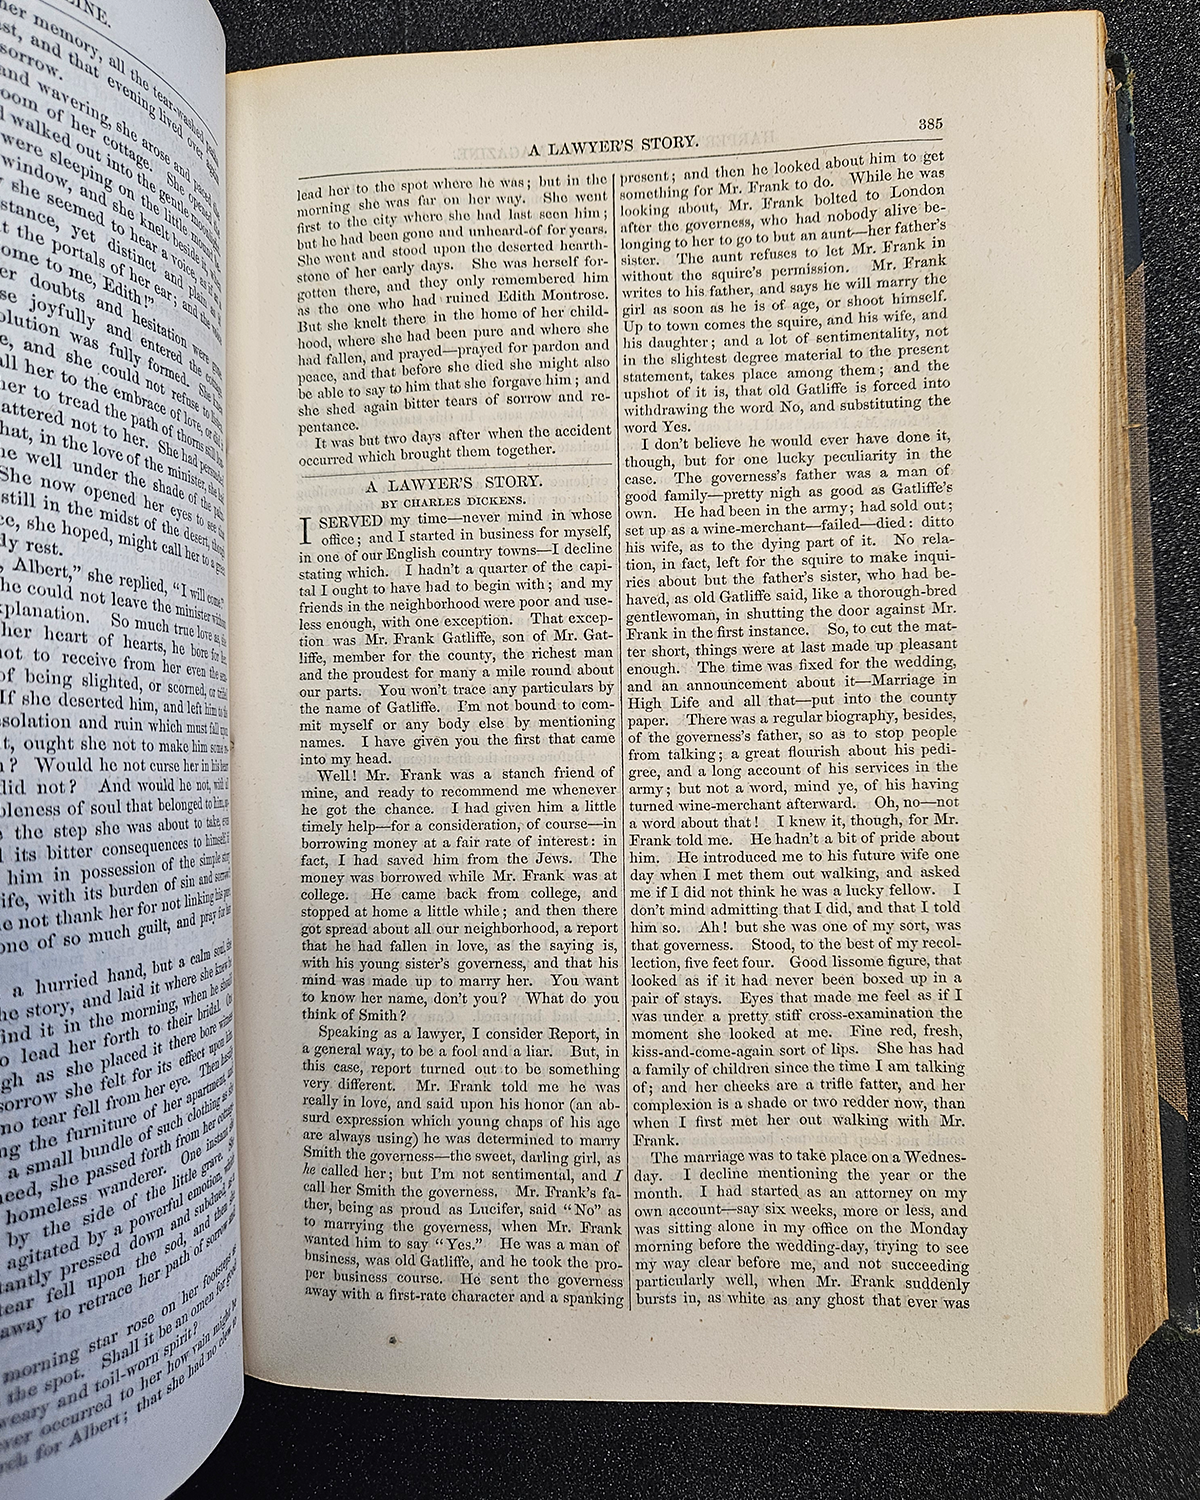 The Lawer's Story featured in a 1855 Harper's issue